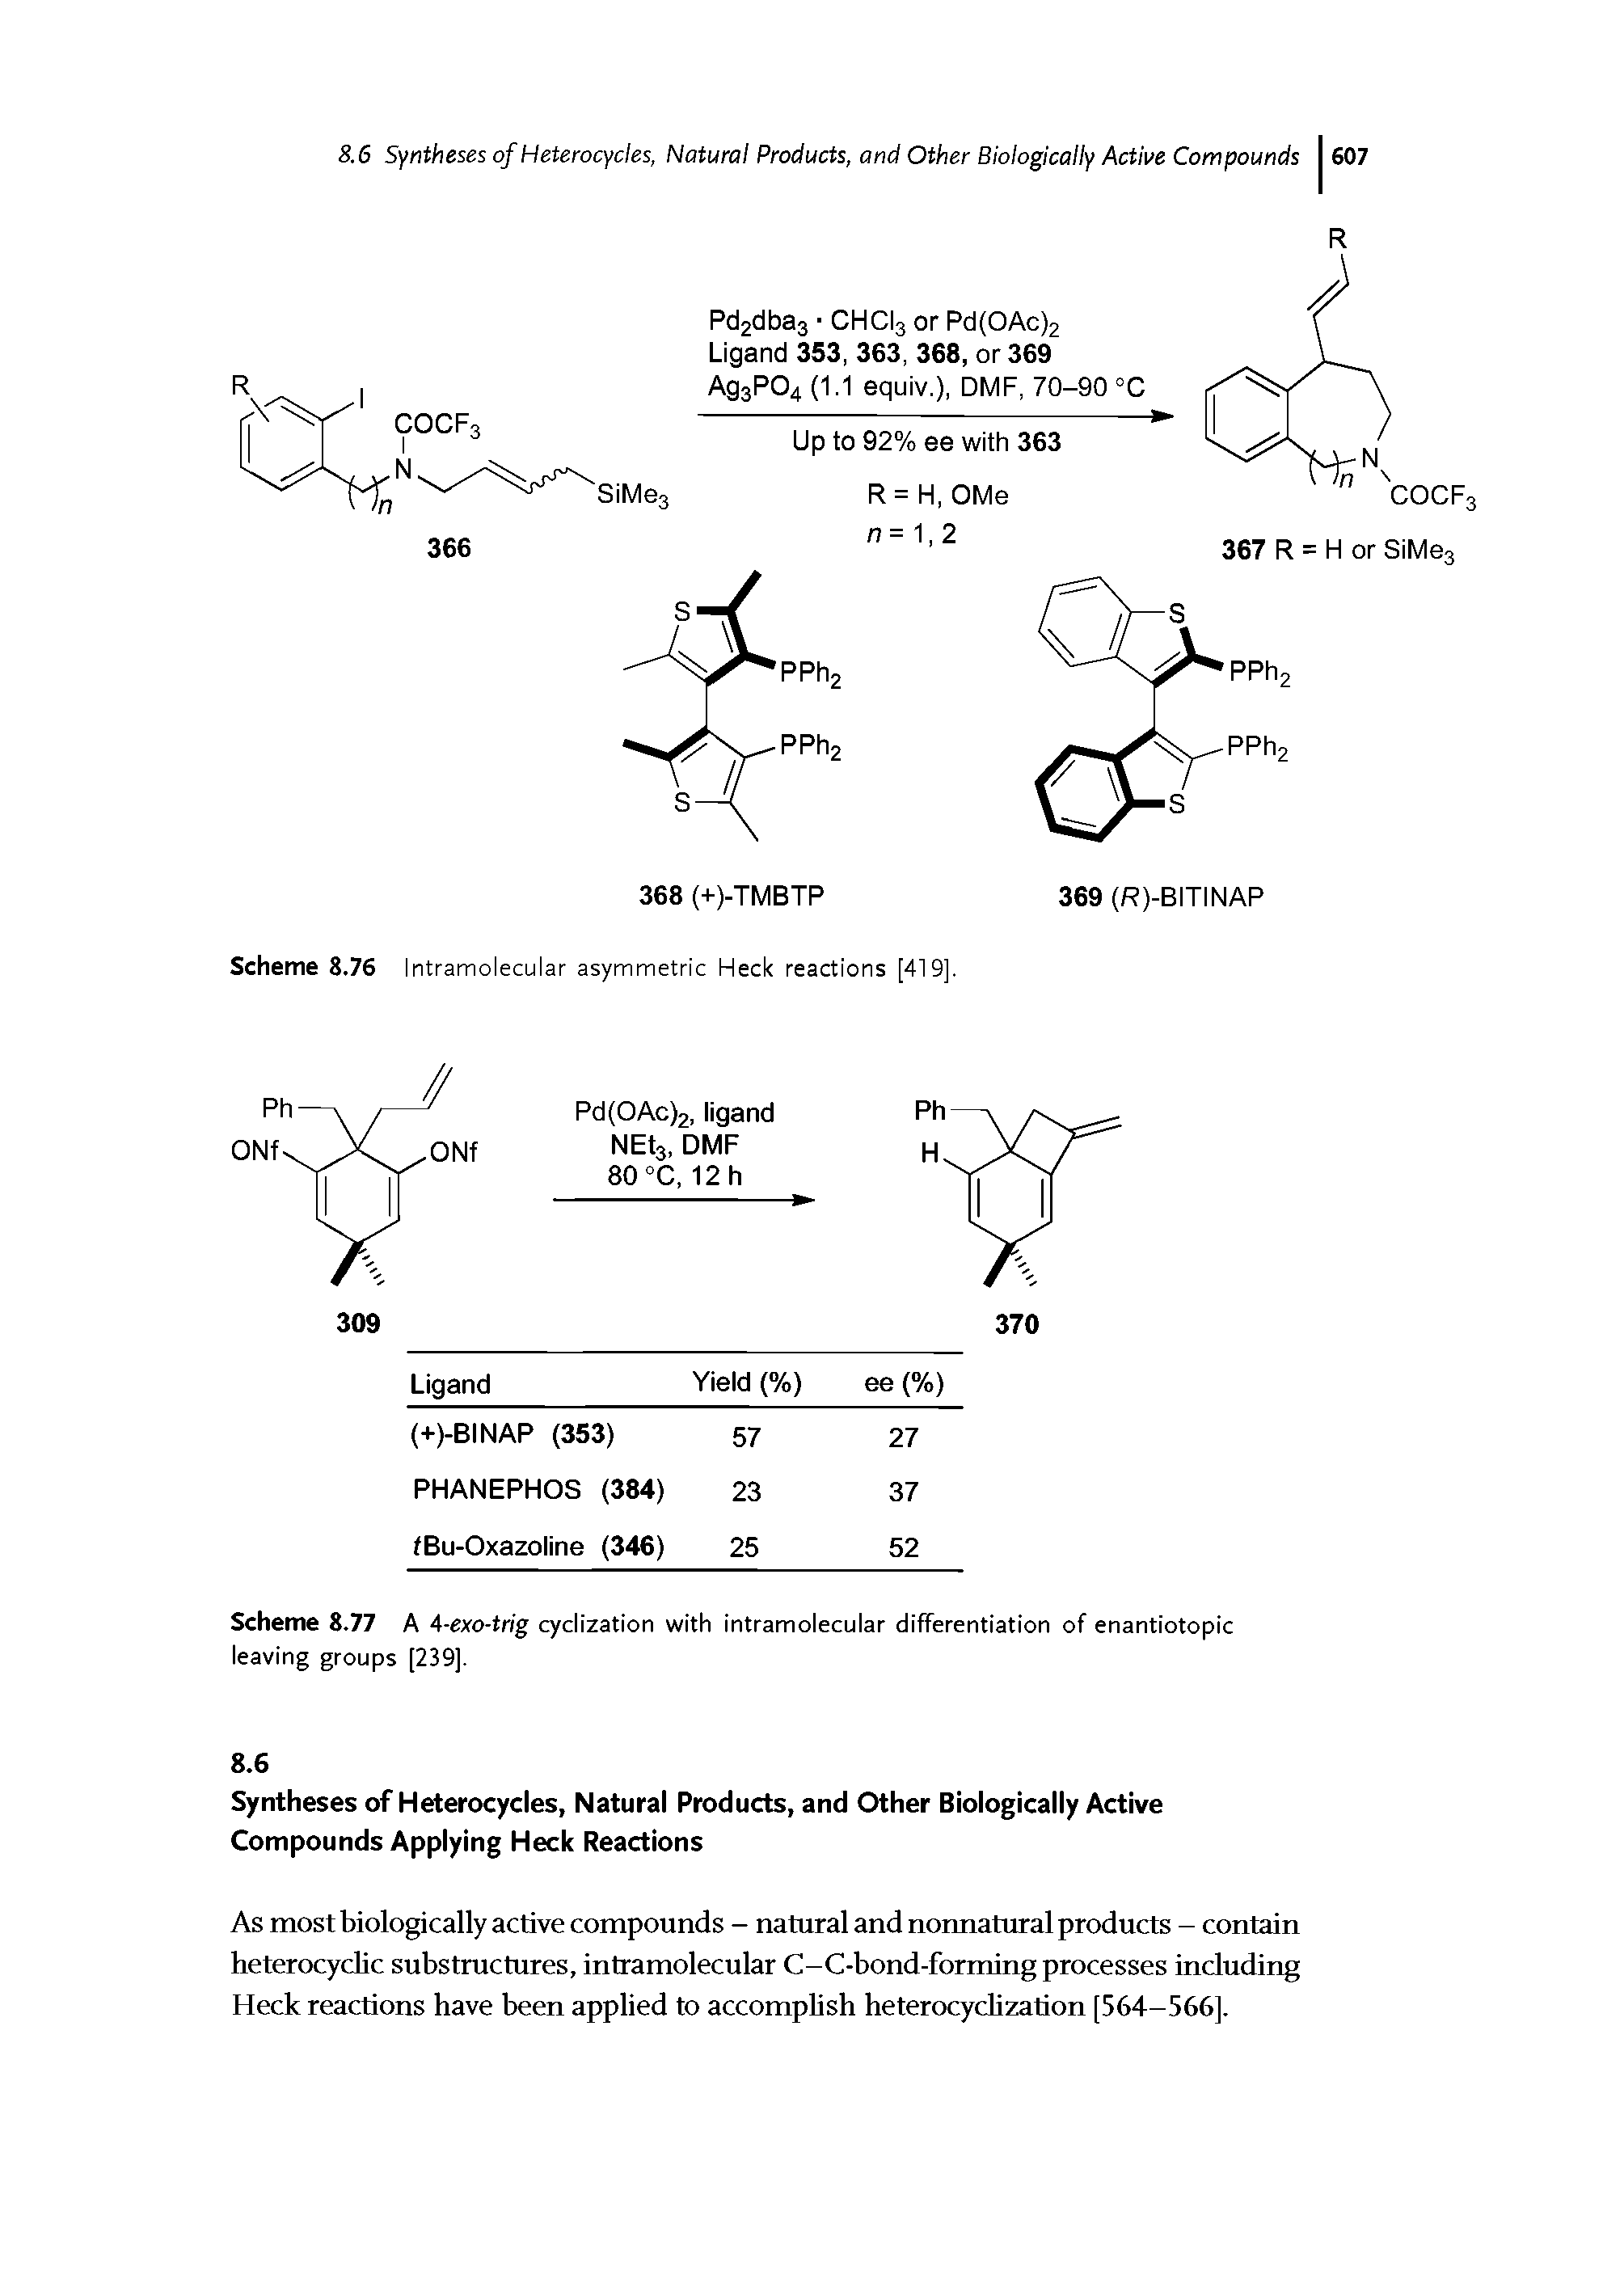 Scheme 8.77 A 4-exo-trig cyclization with intramolecular difTerentiation of enantiotopic leaving groups [239].